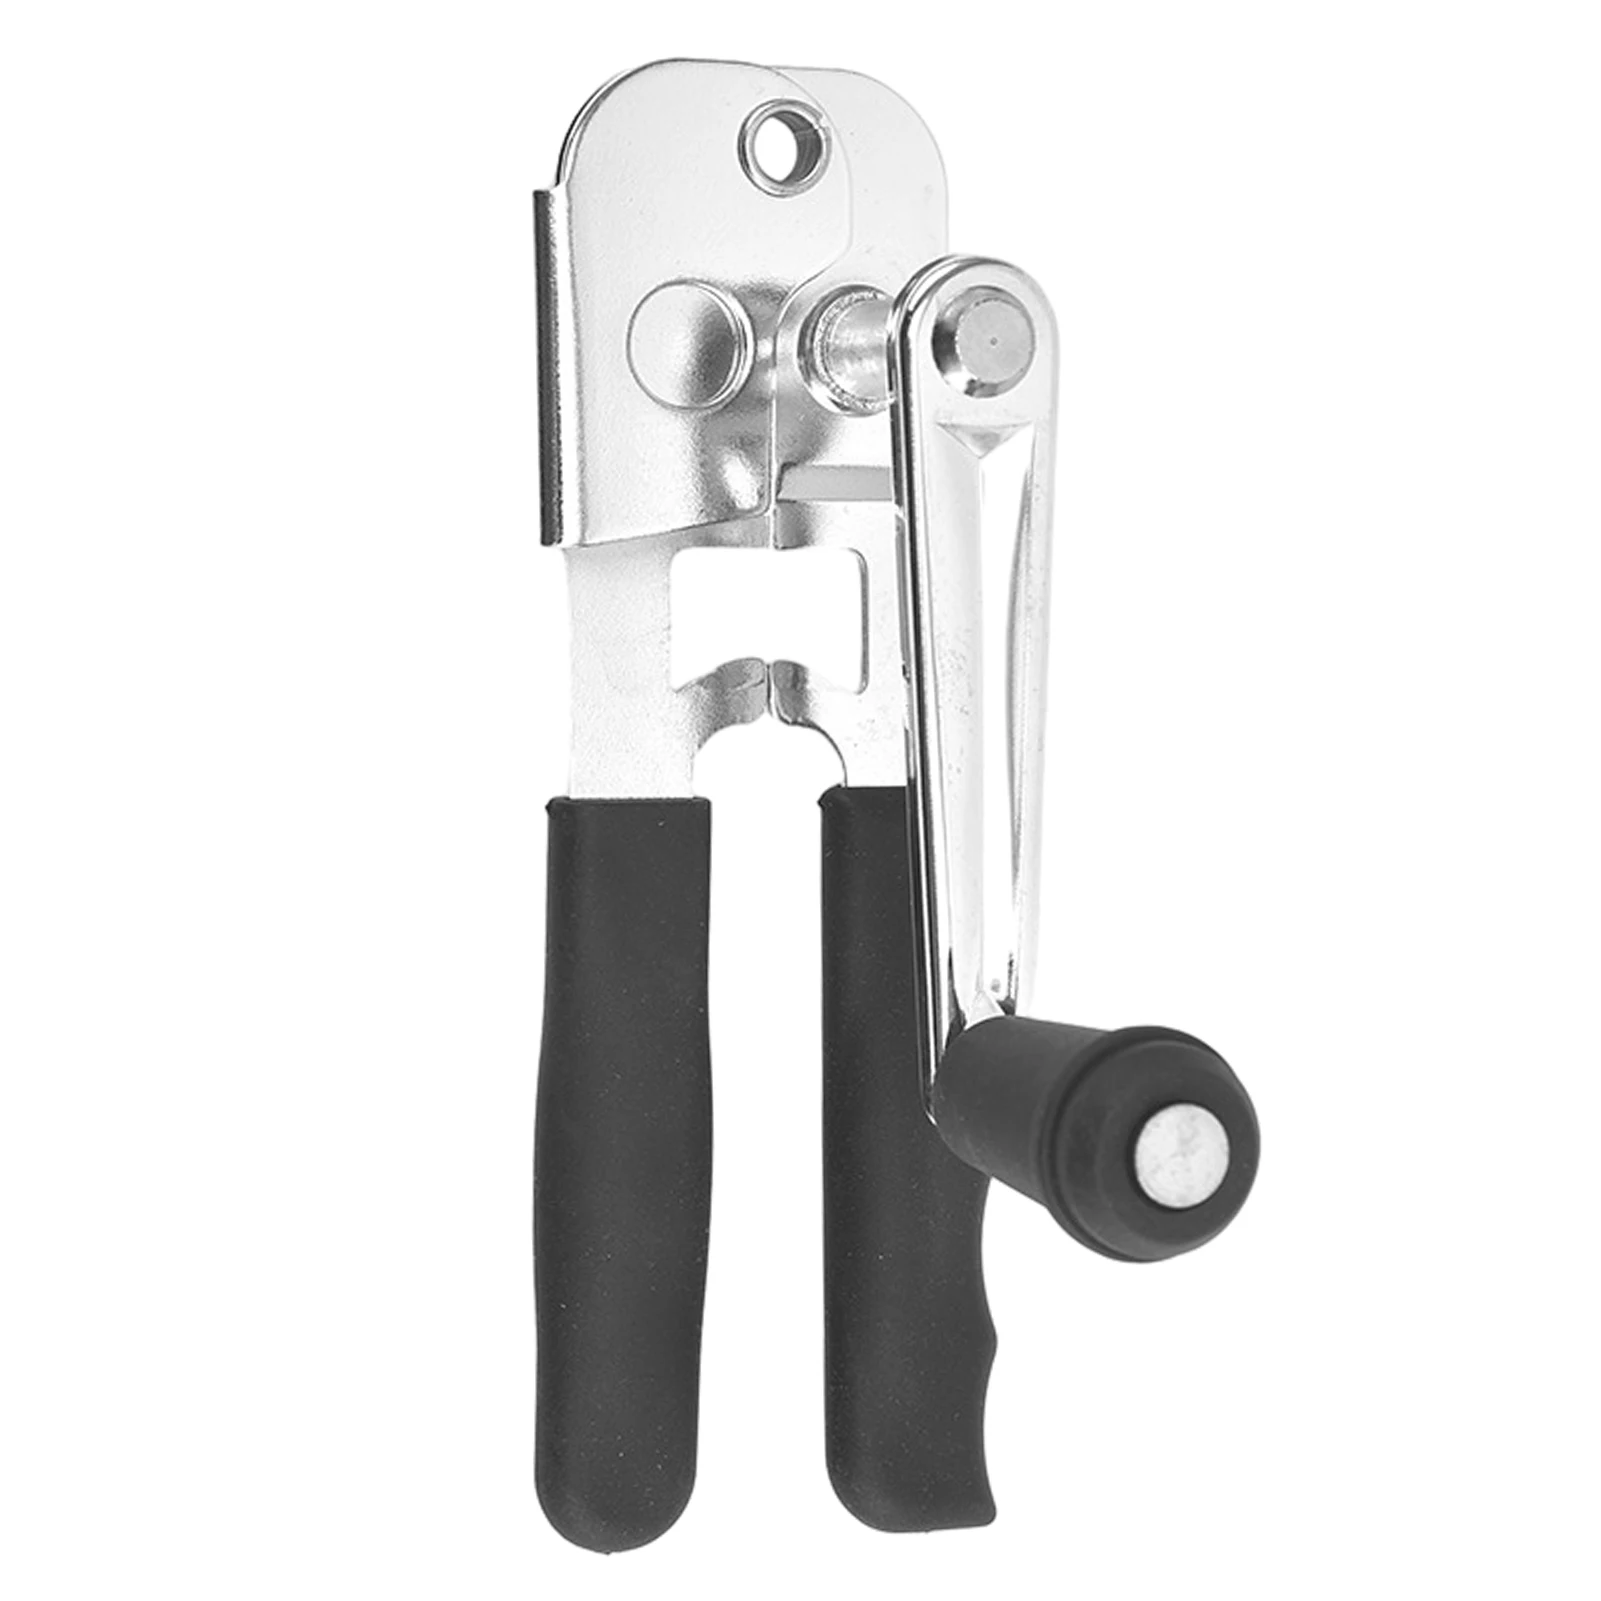 

Comfortable Commercial Wine Drink Knob Useful Manual Tool For Kitchen Stainless Steel Hand Crank Can Opener Universal Heavy Duty